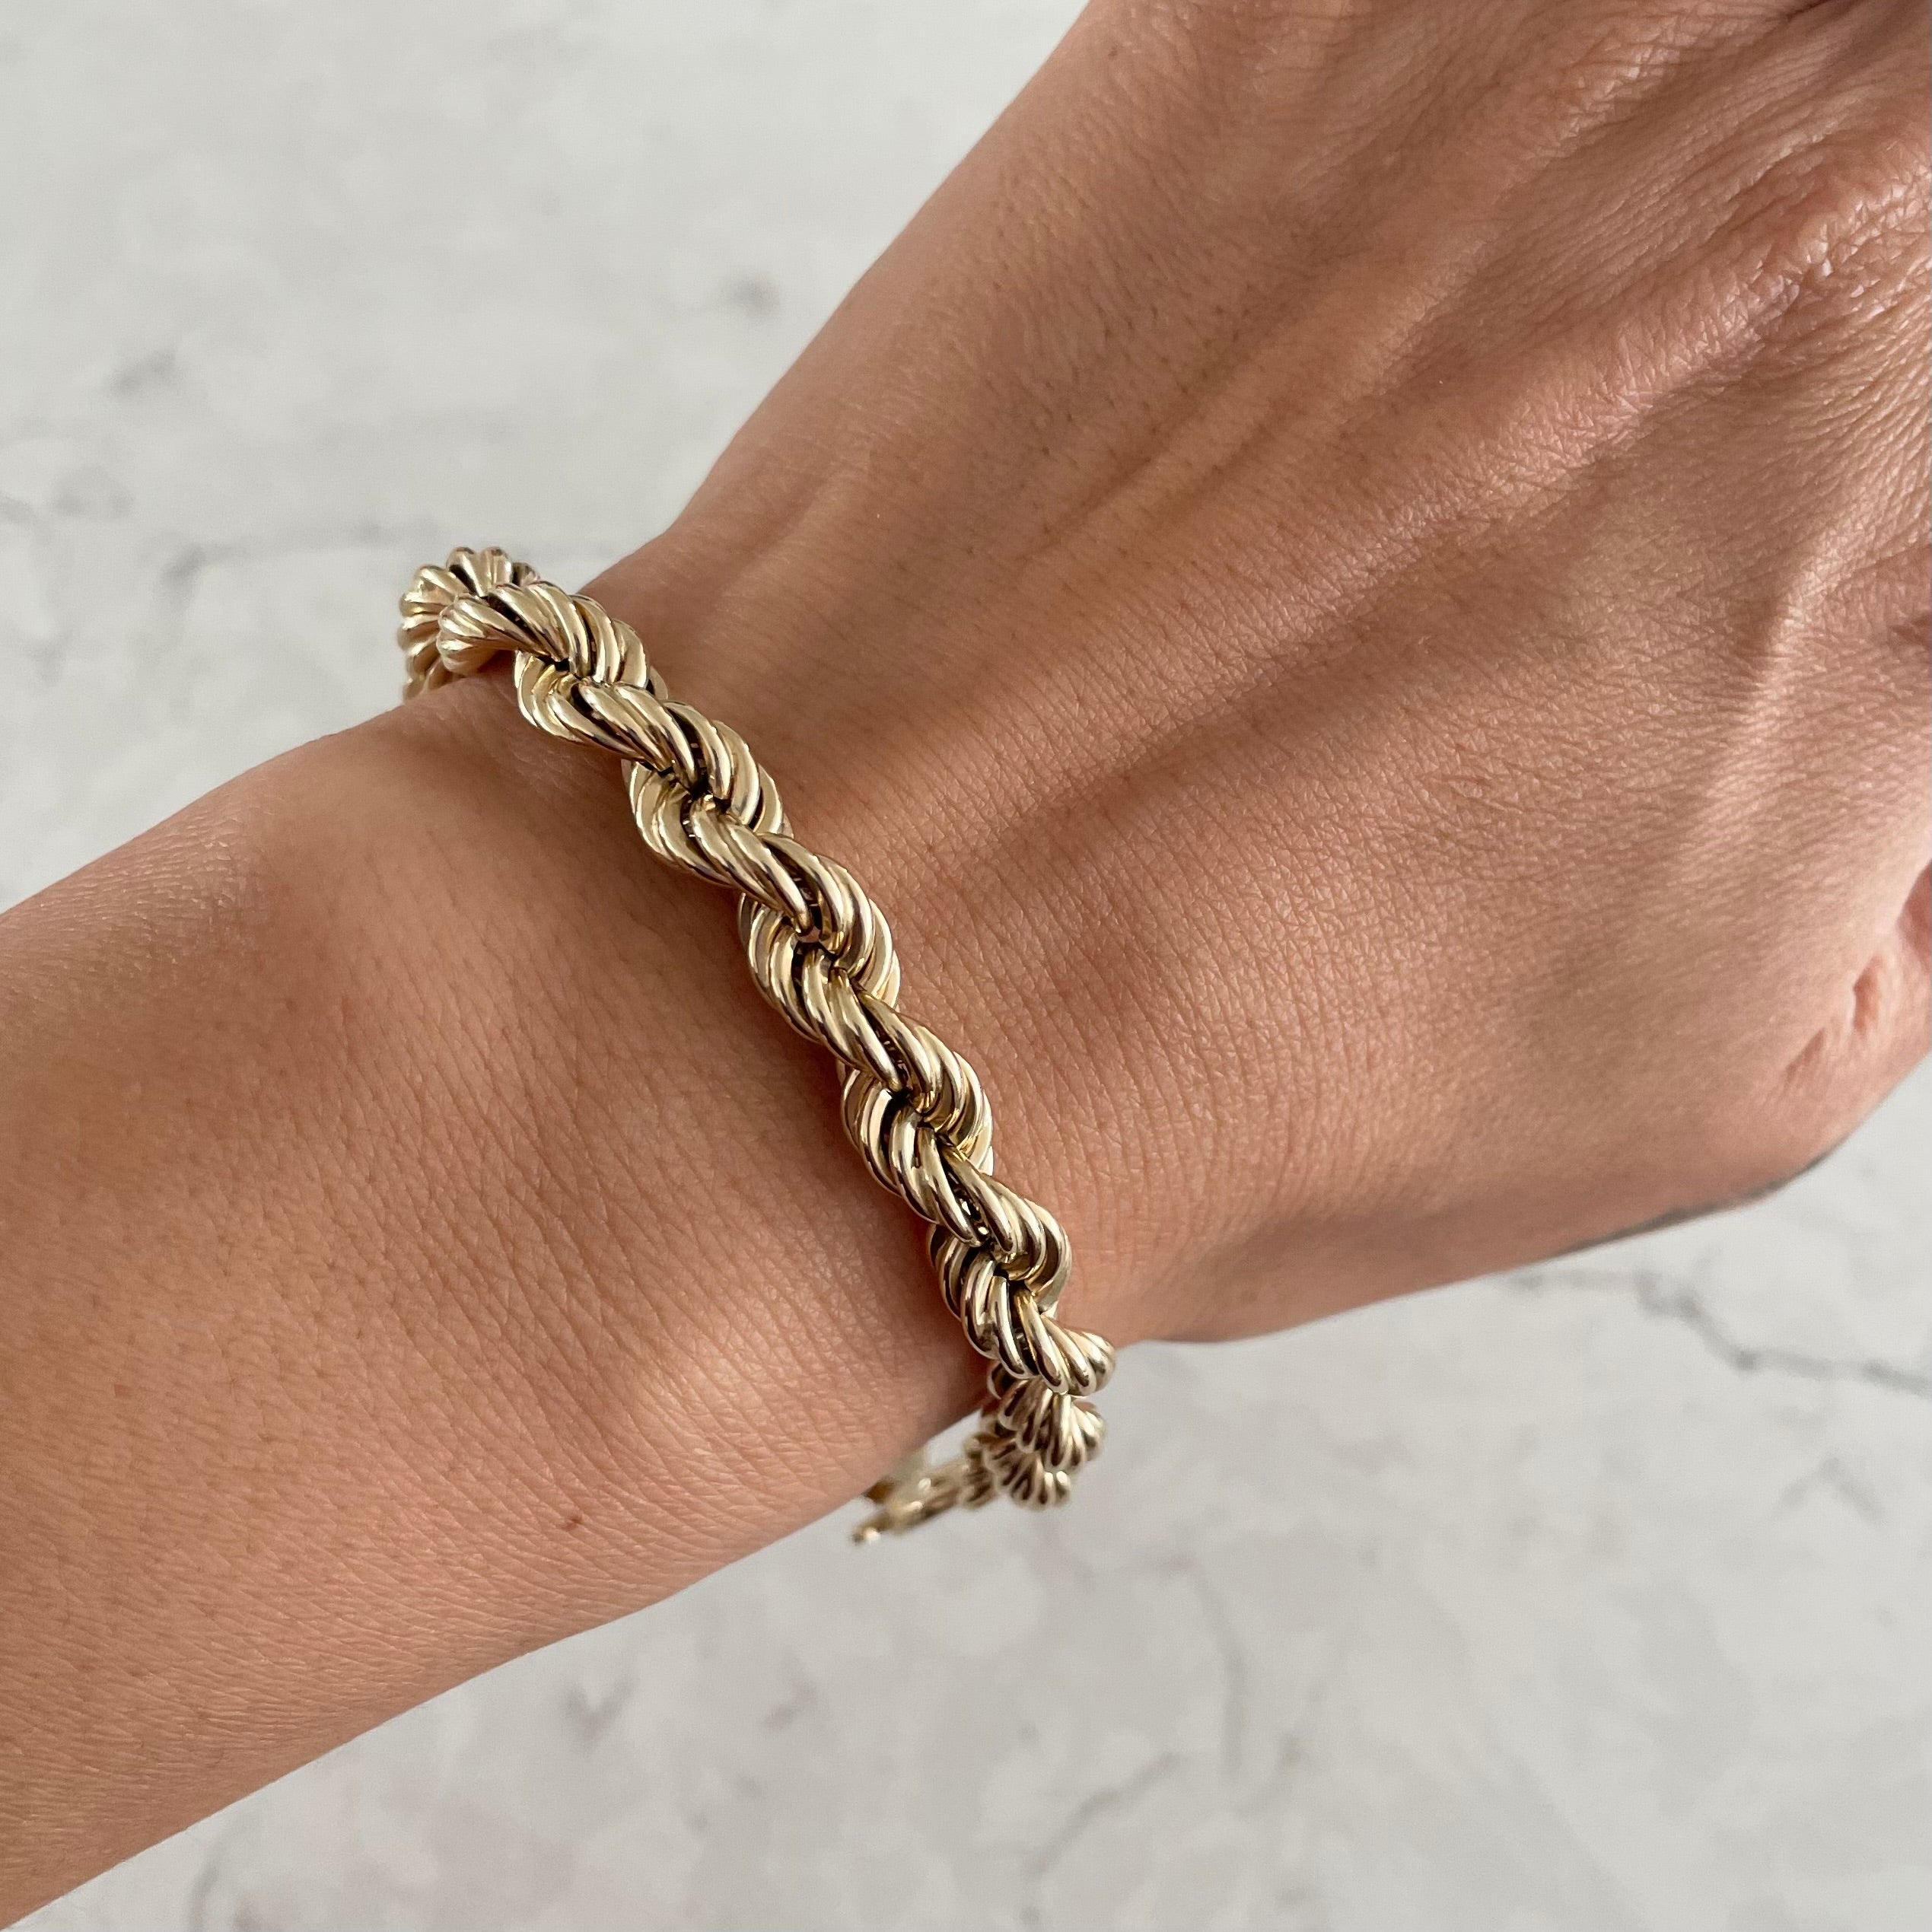 14k solid yellow gold rope chain bracelet